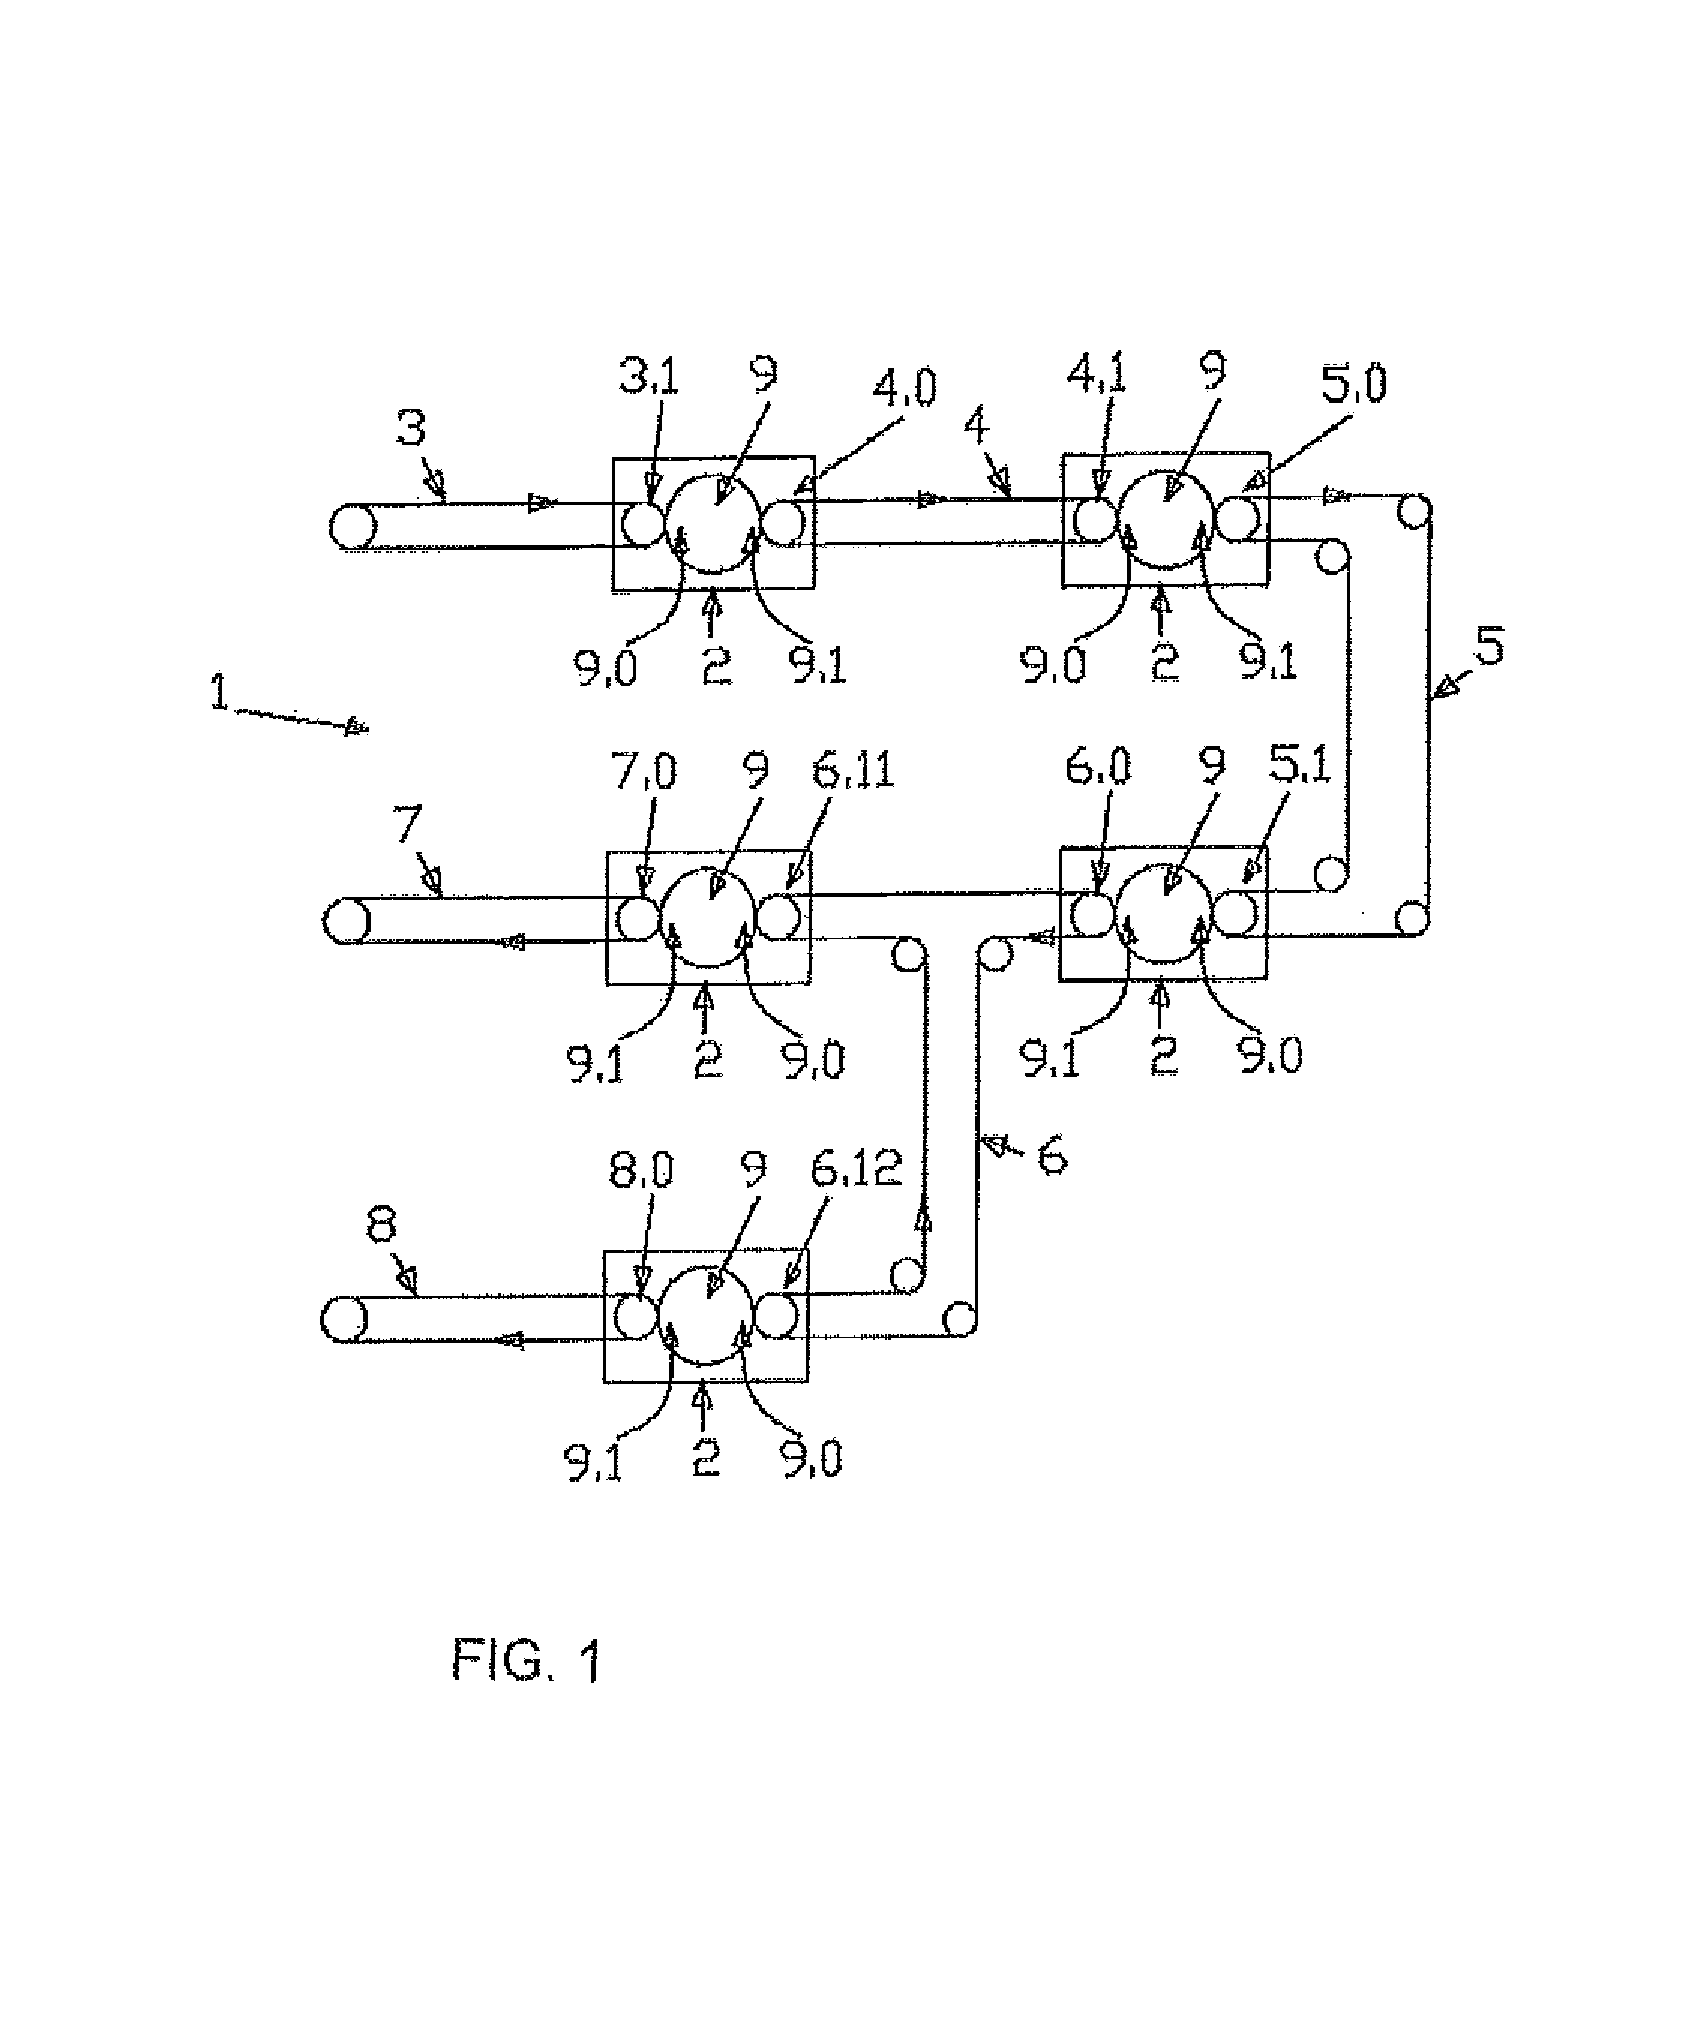 Poultry processing apparatus having one or more transfer units